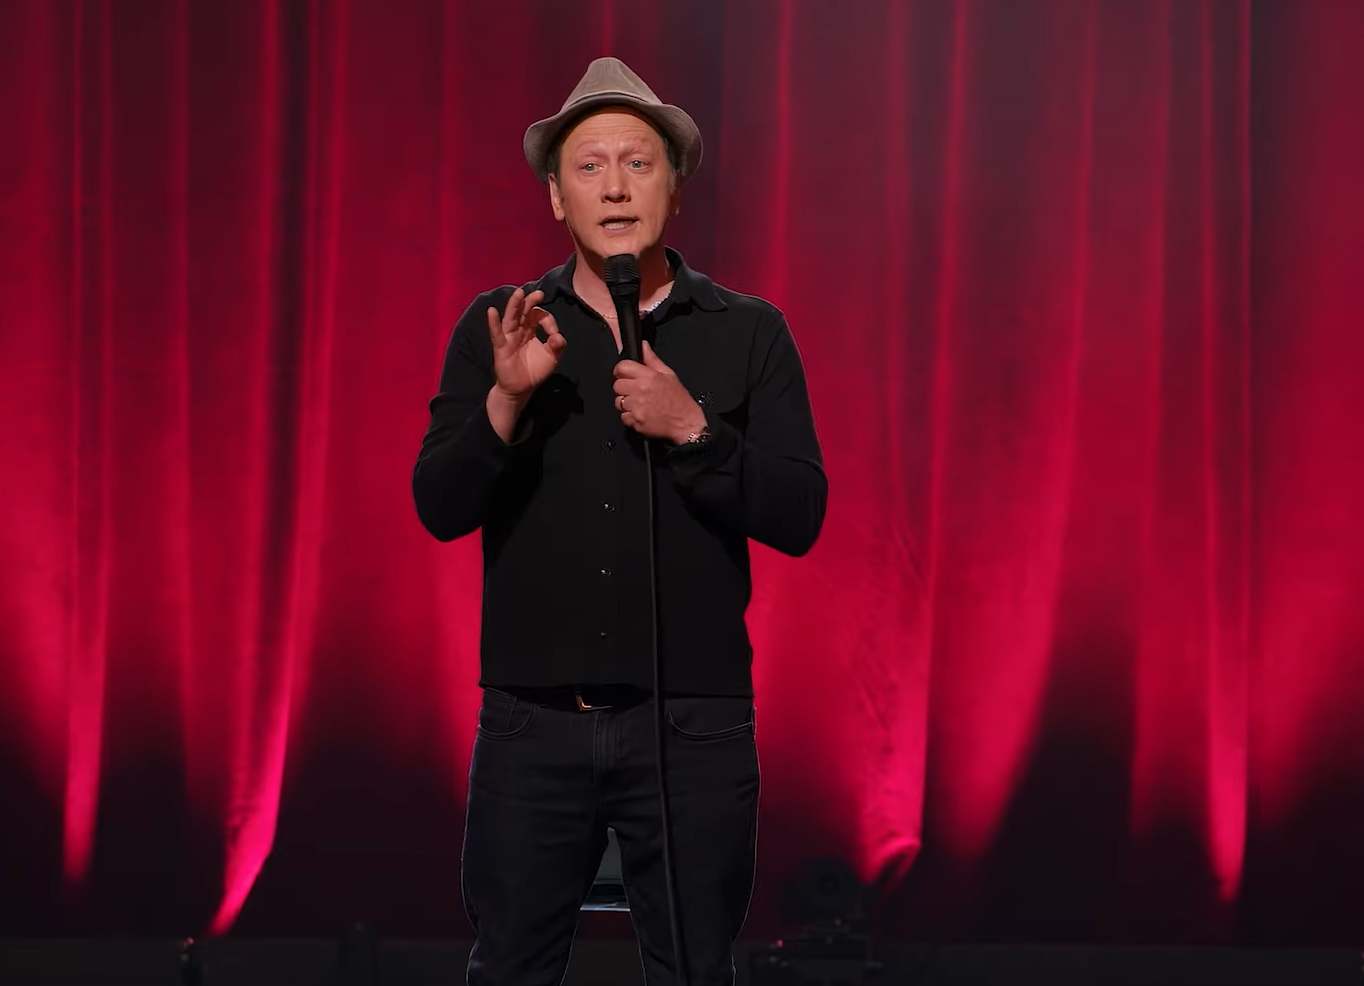 Rob Schneider in hat and black clothes standing on stage with red curtains behind